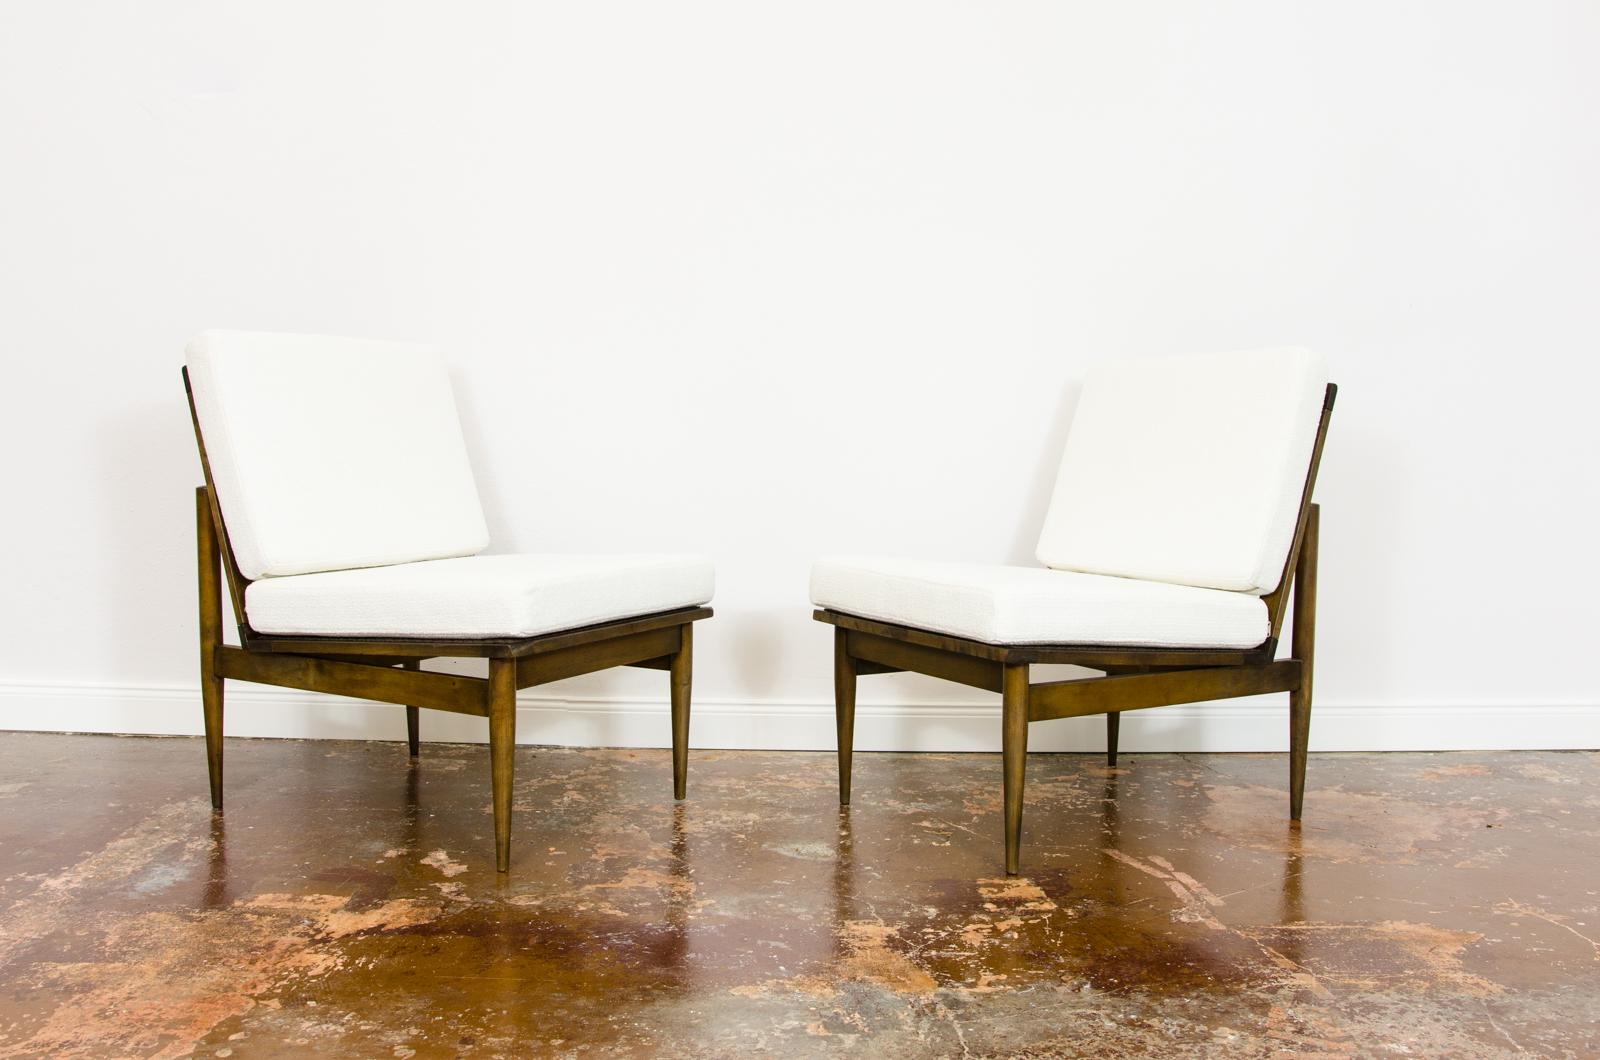 Pair of rare white mid-century vintage lounge chairs from Poznanskie Furniture Factories, 1960s.

Pair of mid-century Lounge chairs manufactured in Poznanskie Fabryki Mebli, Poland 1960's.
Solid wood construction have been completely